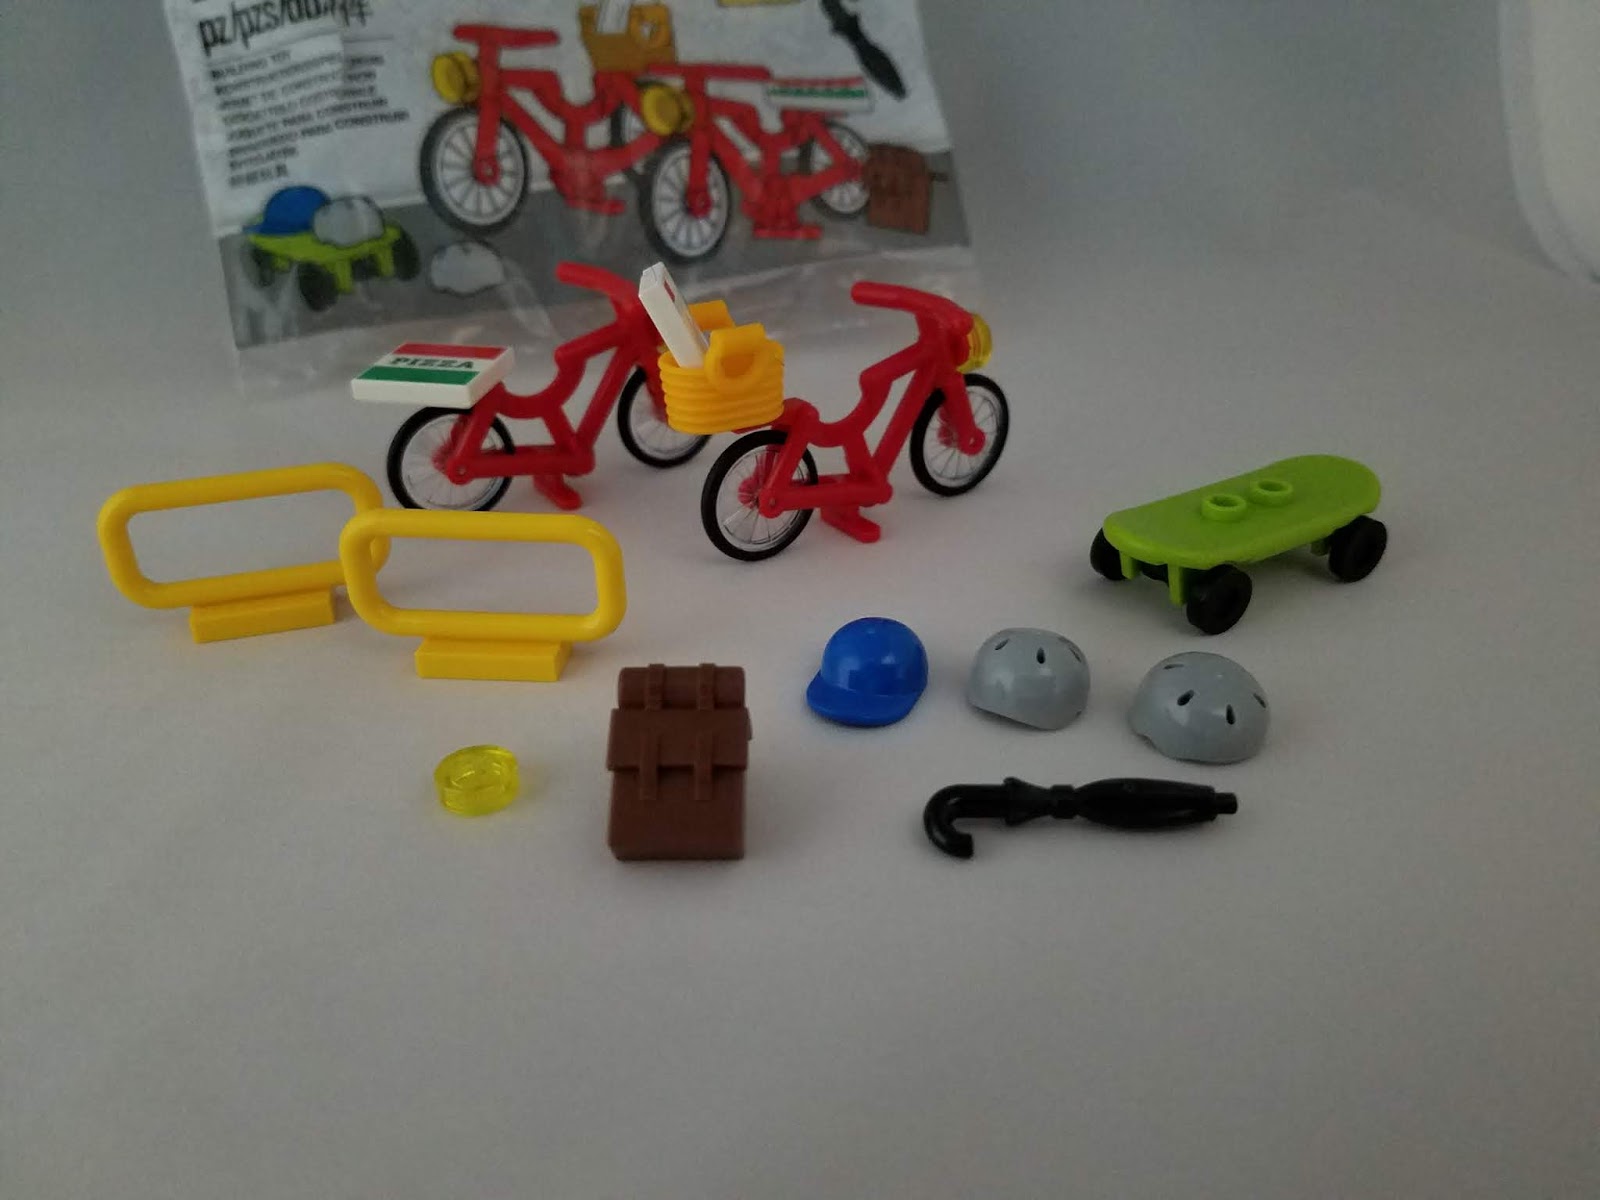 Case 30 LEGO Xtra 40313 Bicycles Accessories Polybag 21pcs for sale online